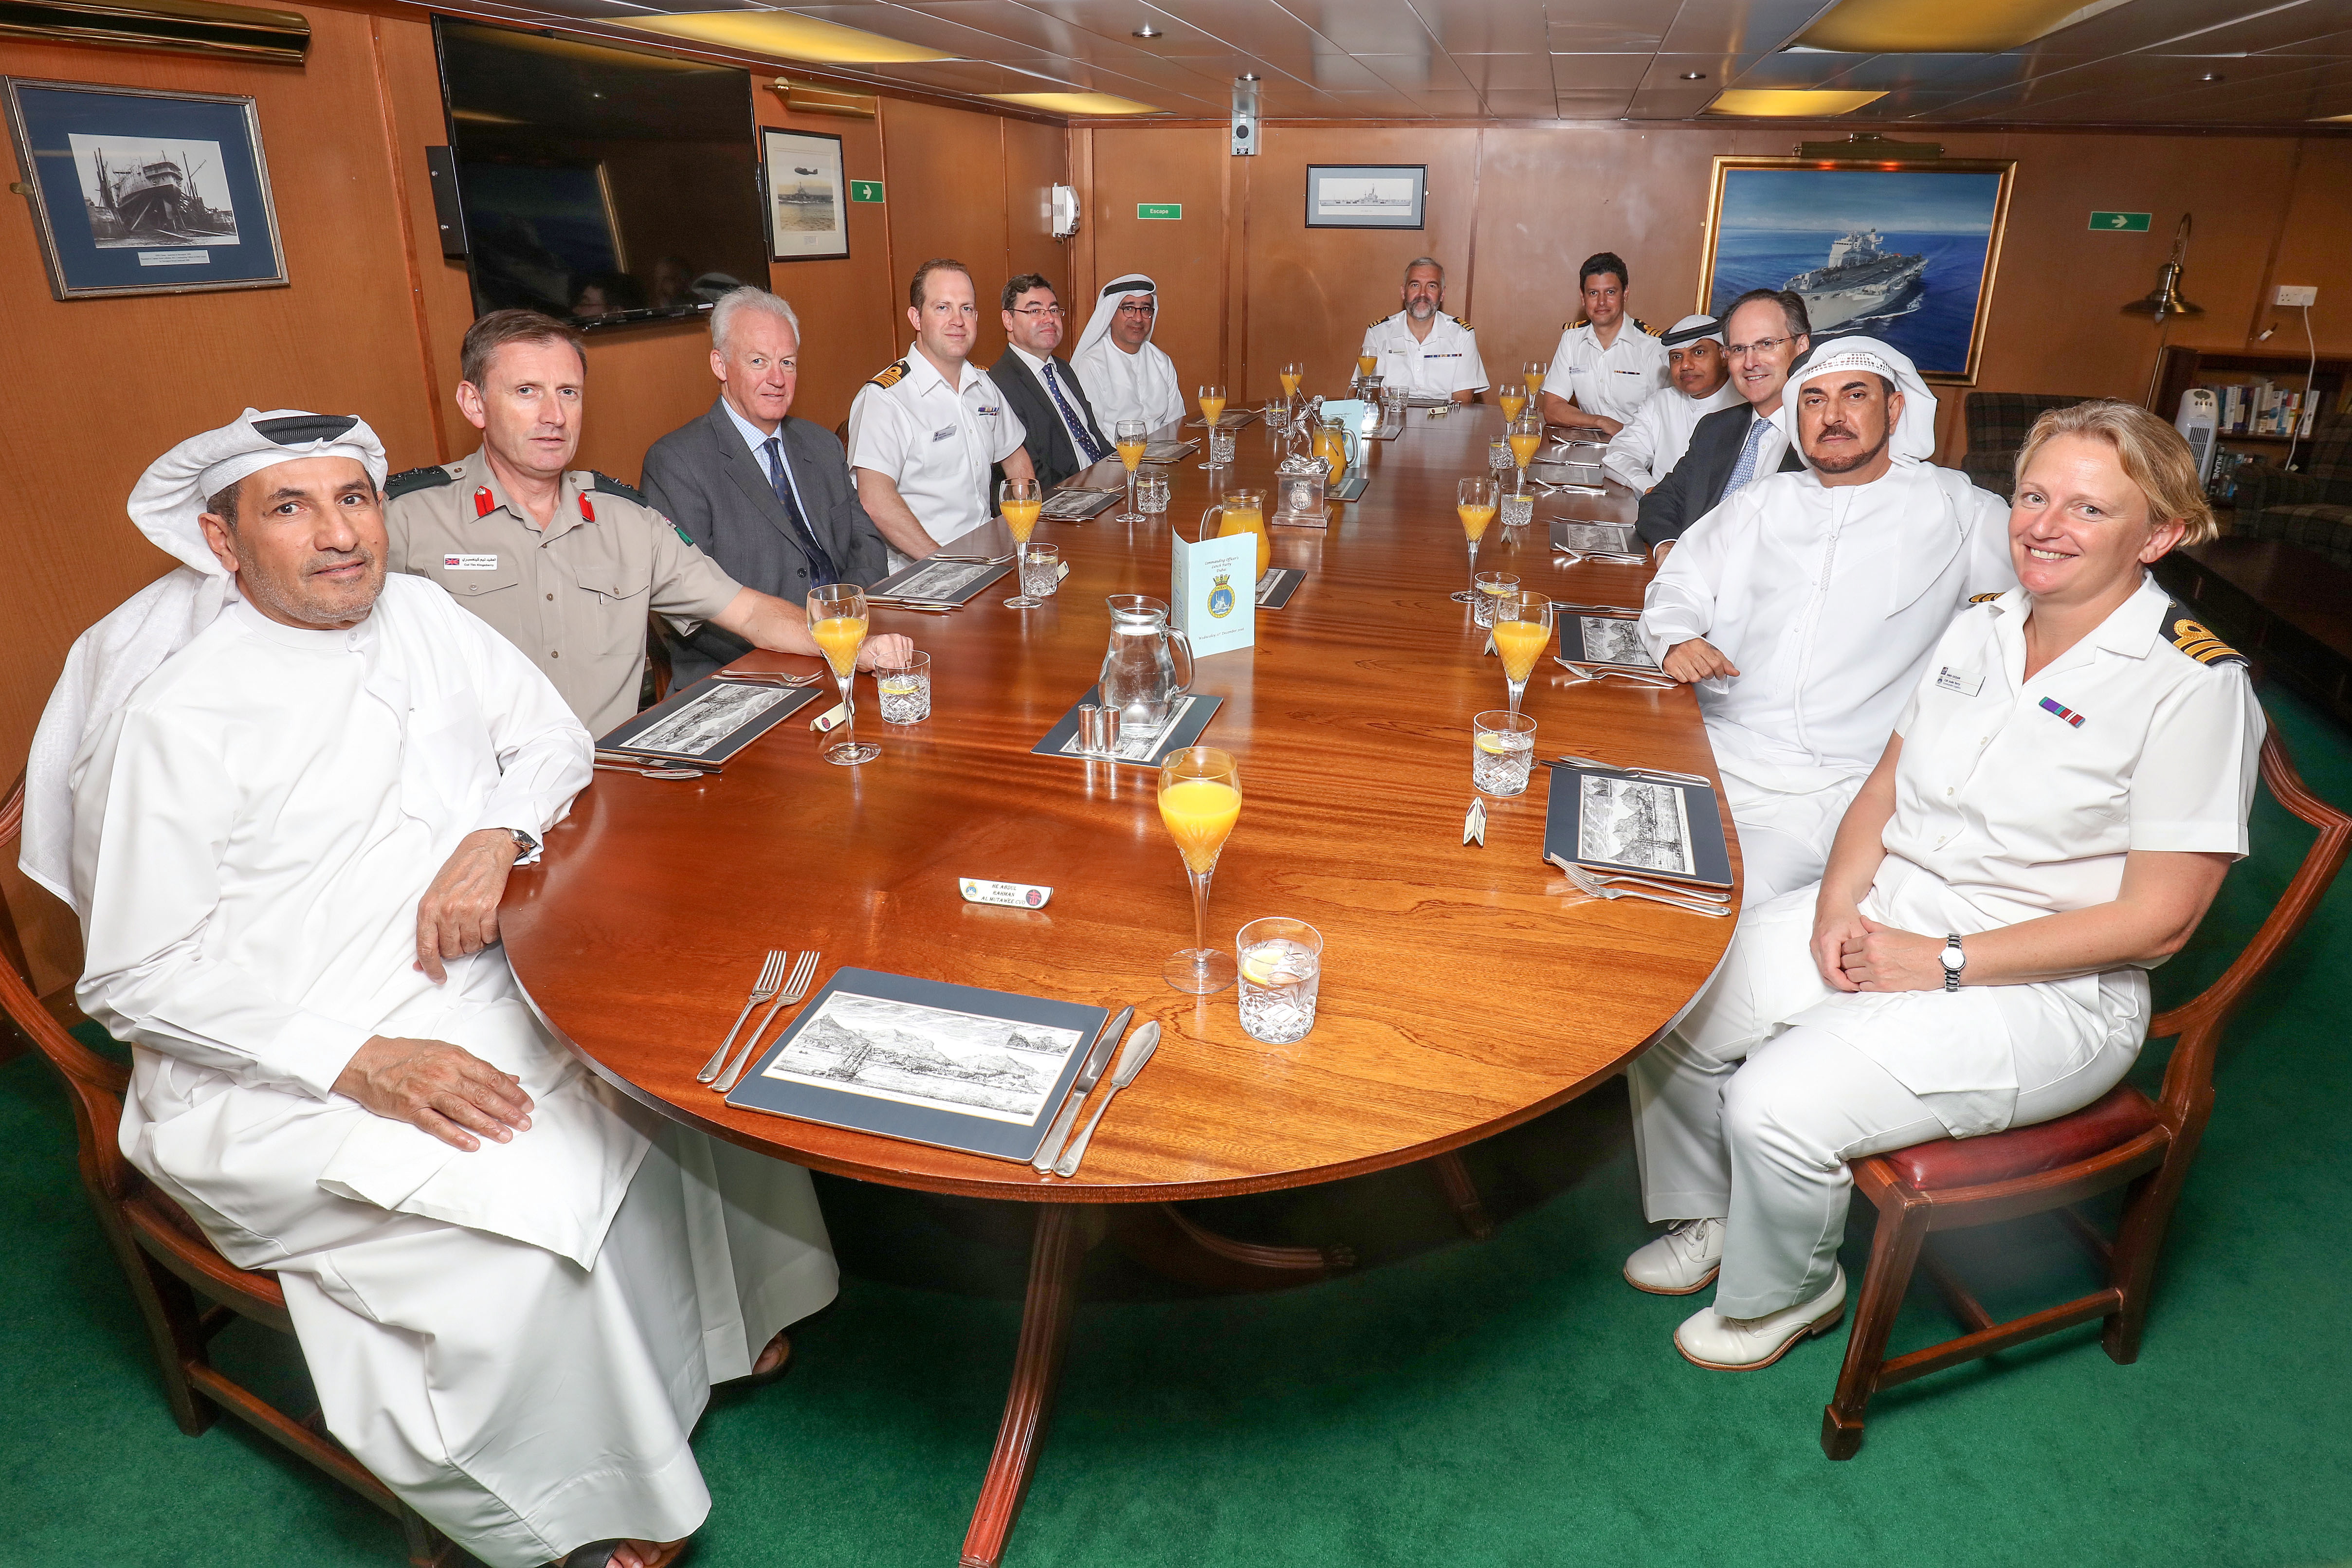 Commander_Terry_front_right_at_a_dinner_for_VIPs_in_the_Middle_East_aboard_HMS_Ocean_in_2016.jpg